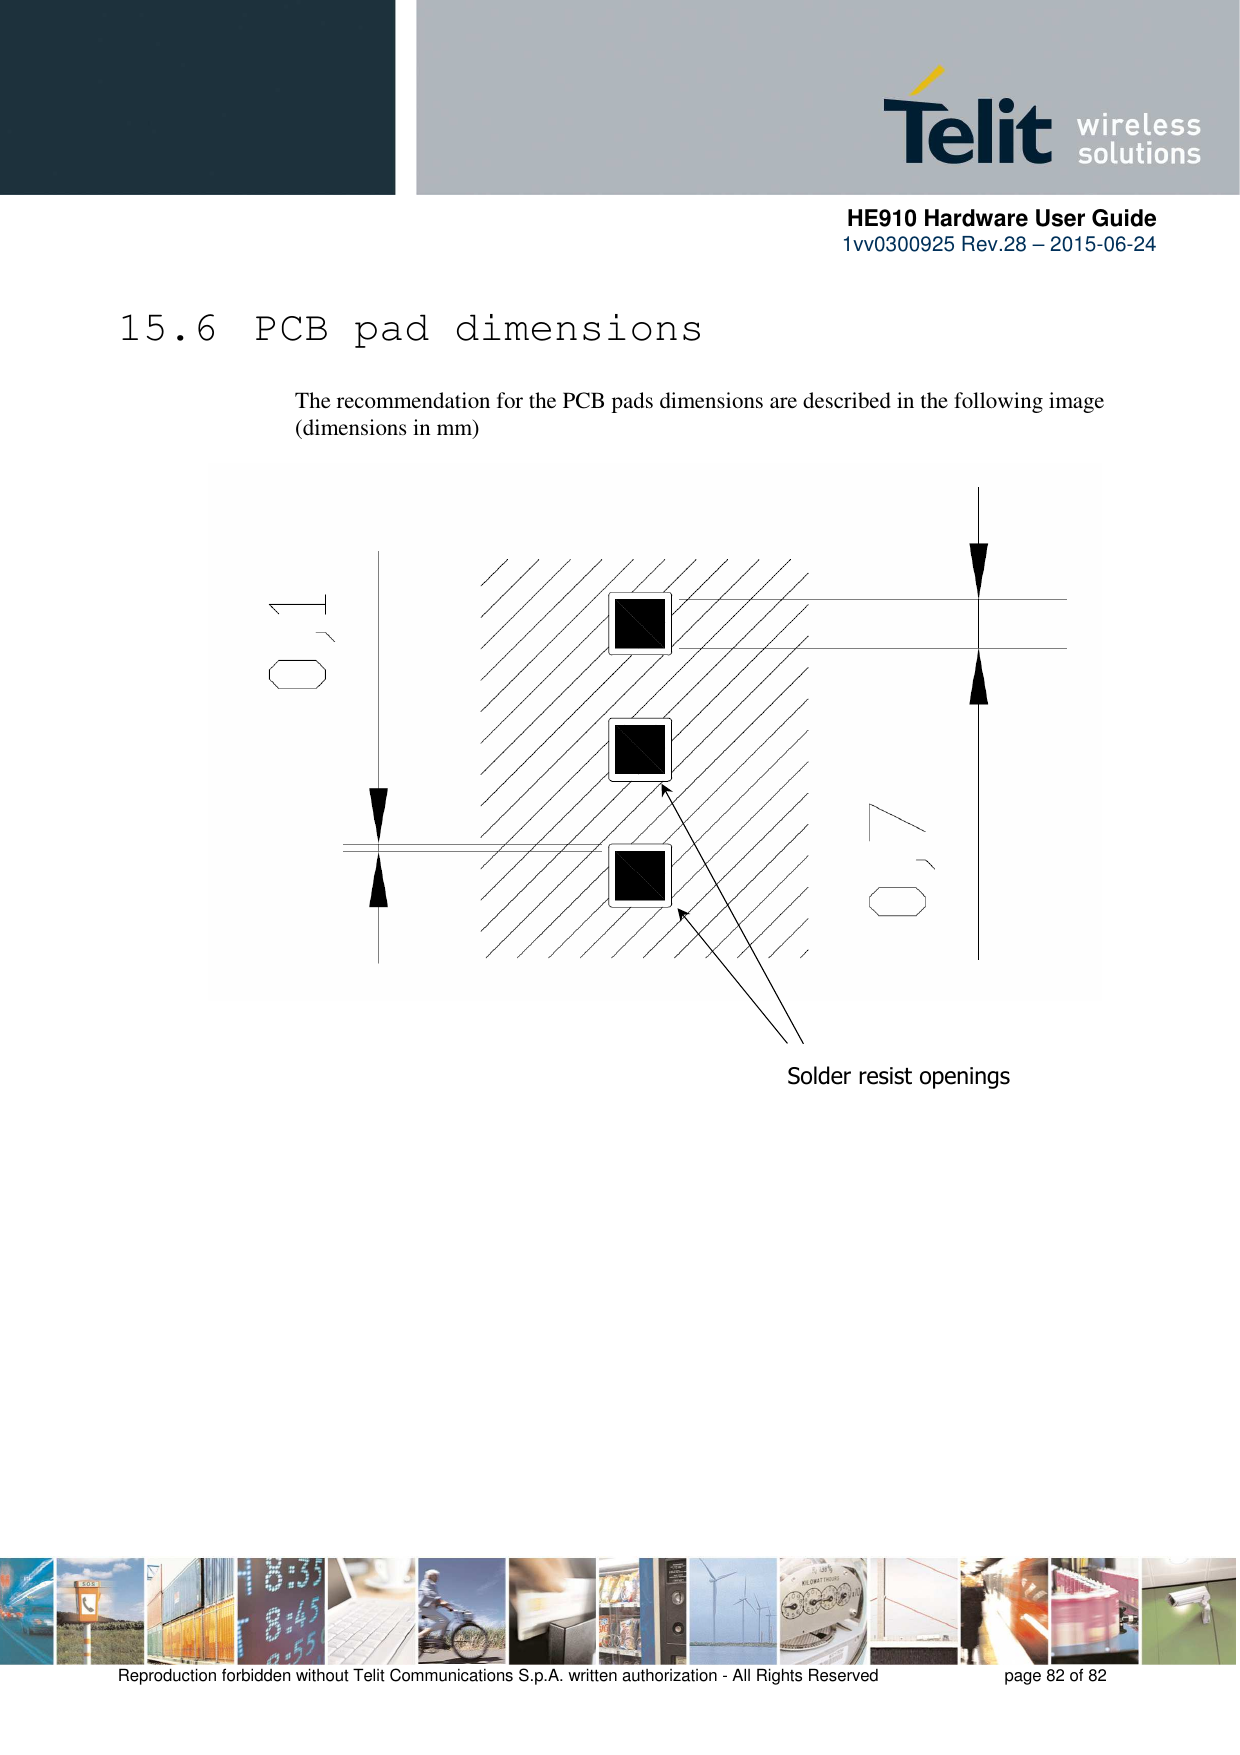      HE910 Hardware User Guide 1vv0300925 Rev.28 – 2015-06-24    Reproduction forbidden without Telit Communications S.p.A. written authorization - All Rights Reserved    page 82 of 82  15.6  PCB pad dimensions The recommendation for the PCB pads dimensions are described in the following image (dimensions in mm)                                 Solder resist openings 